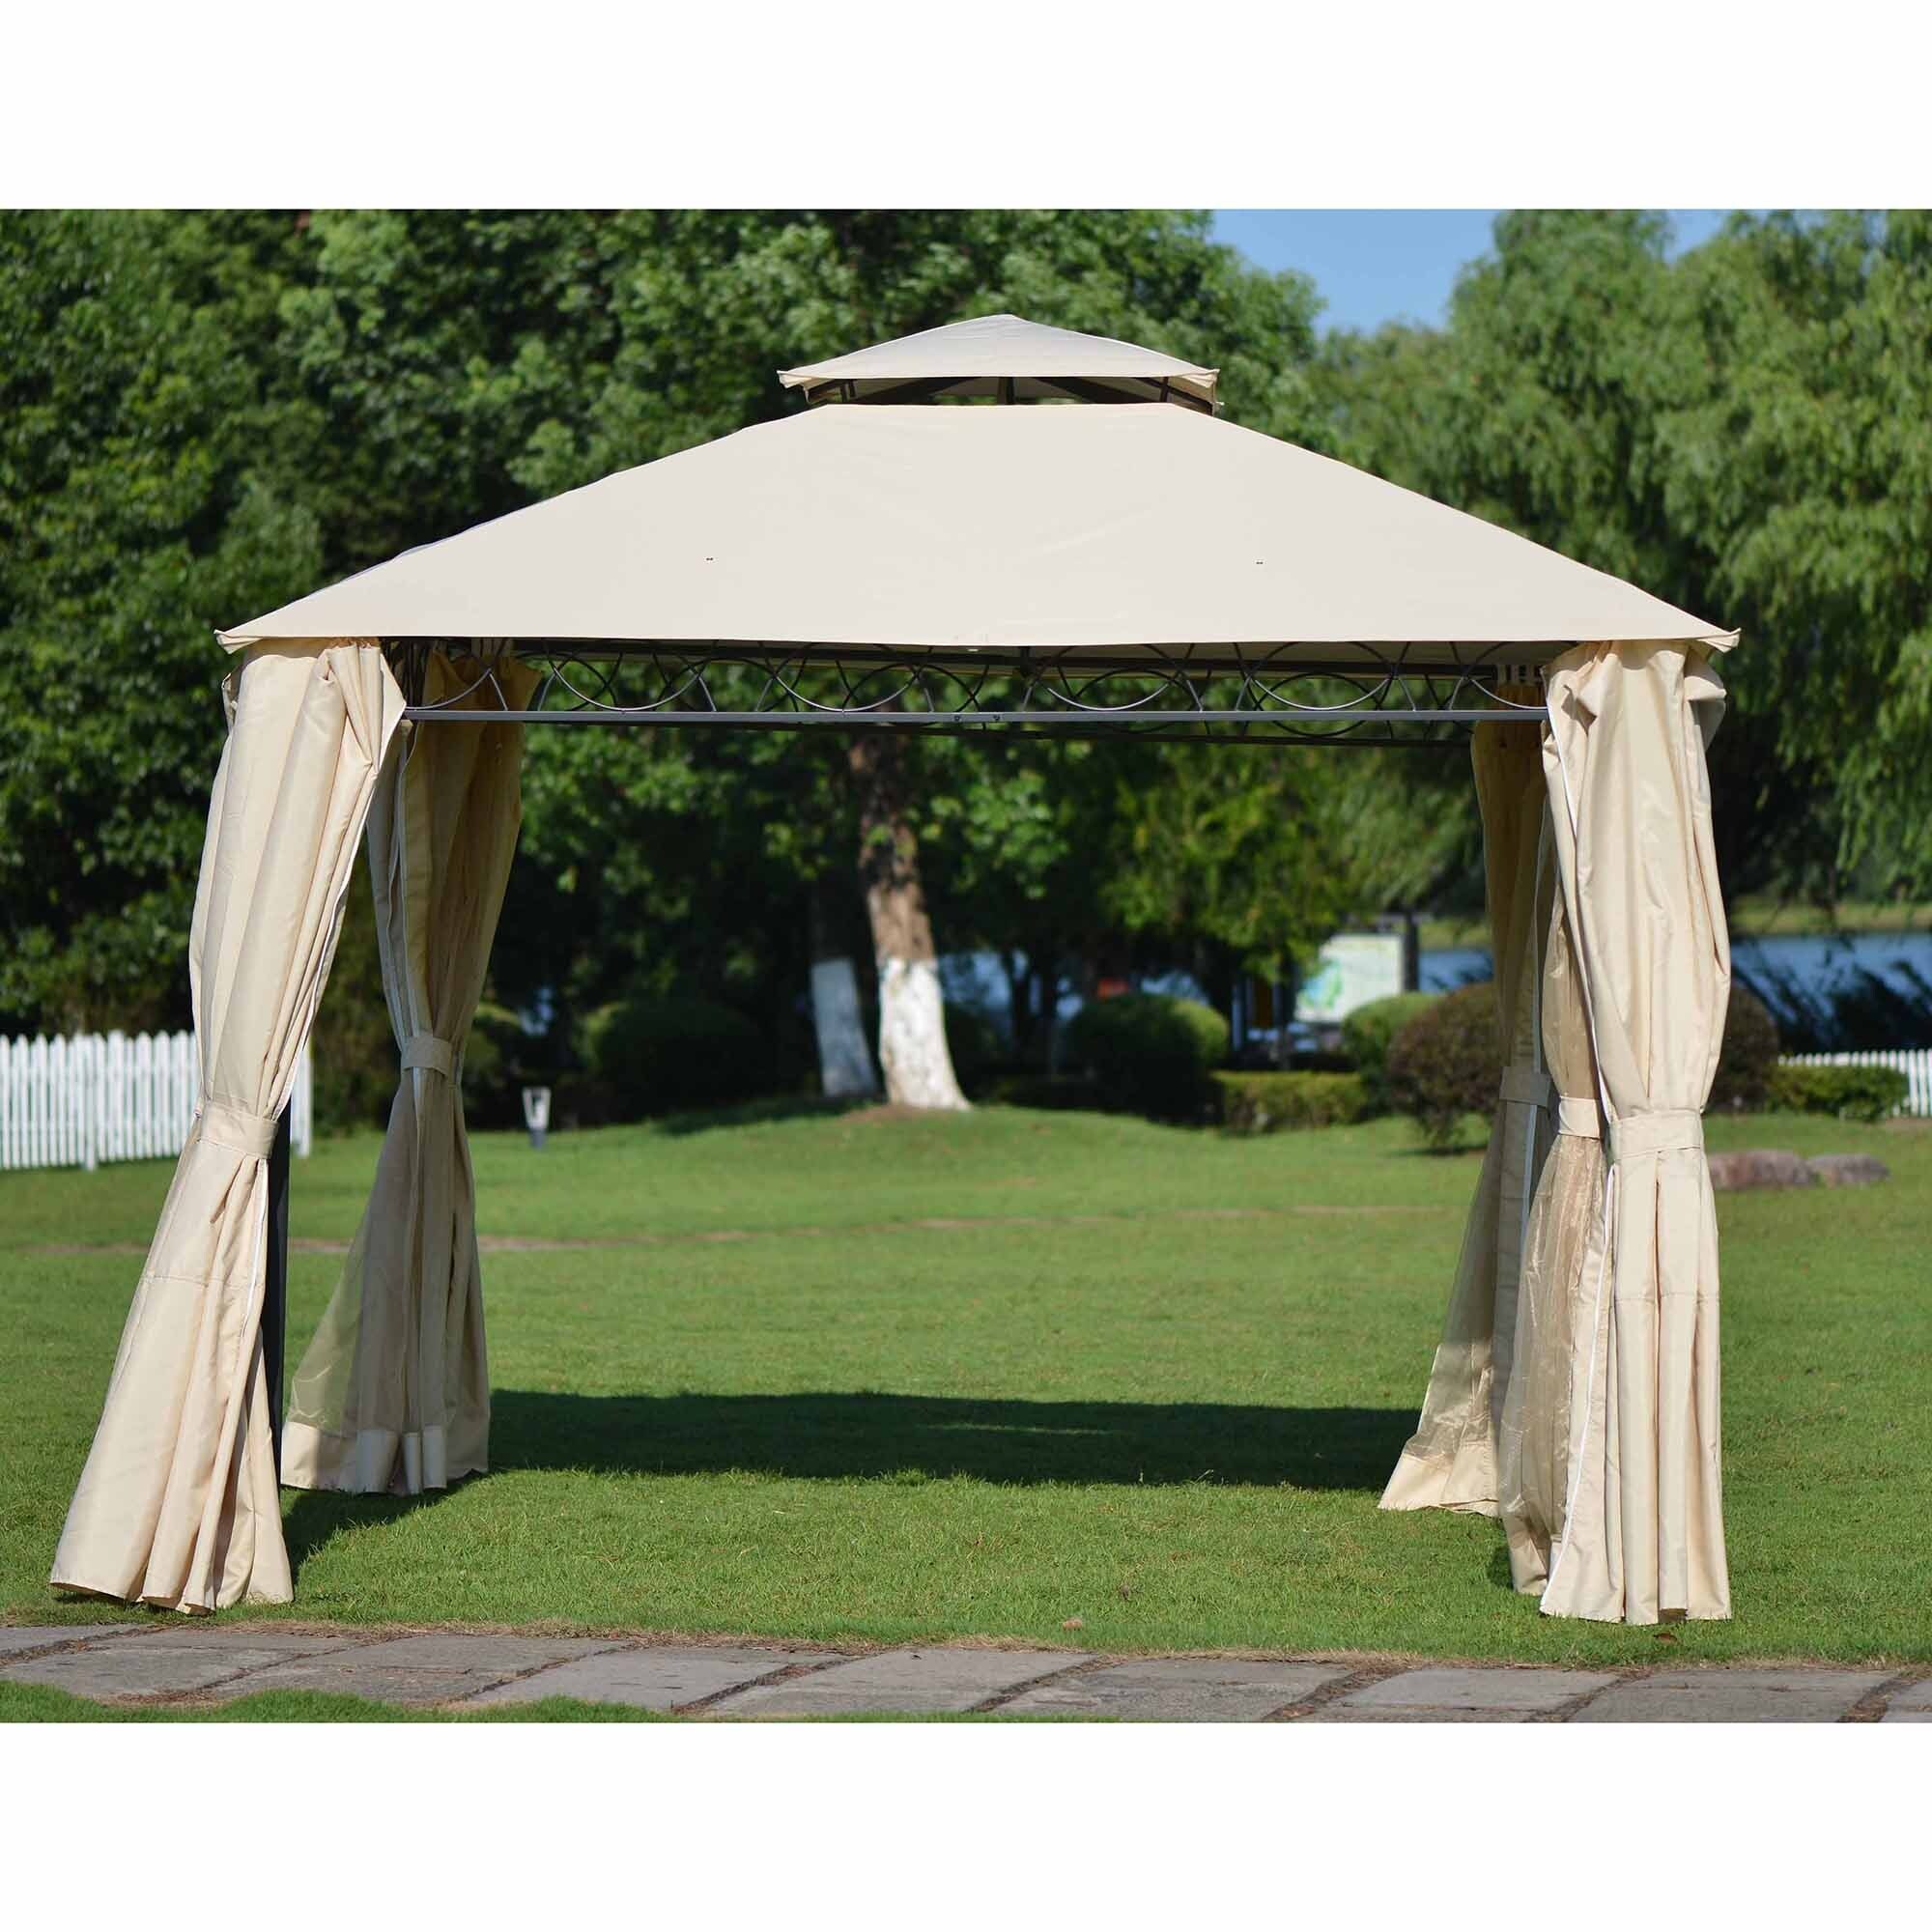 Quality Double Tiered Grill Canopy, Outdoor BBQ Gazebo Tent with UV Protection